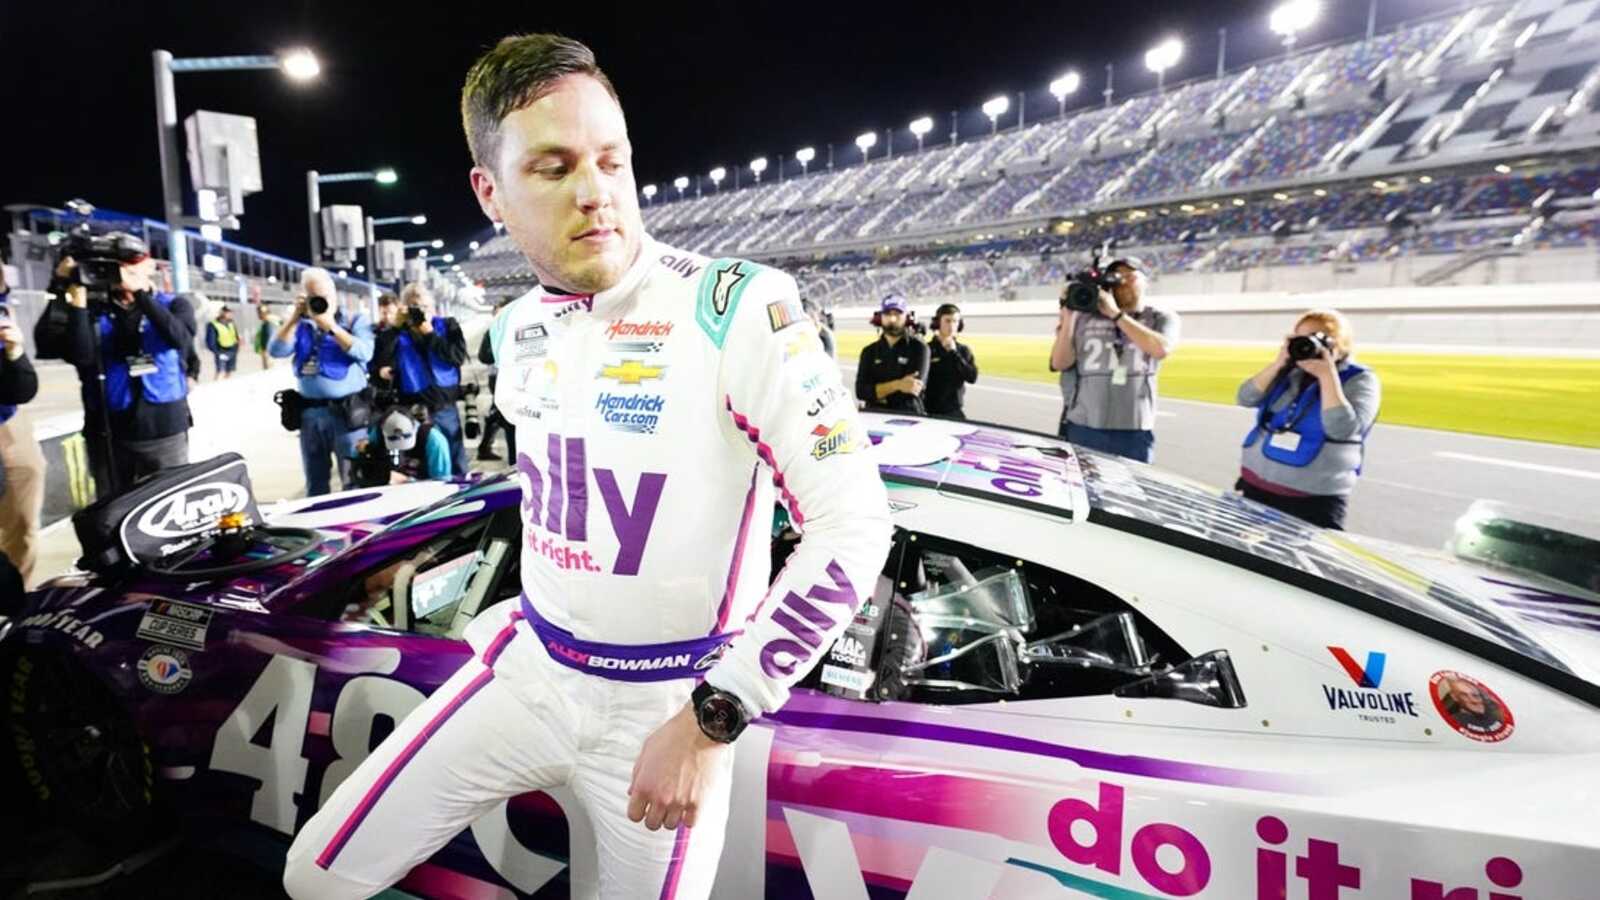 Alex Bowman sets blistering pace in Daytona 500 qualifying